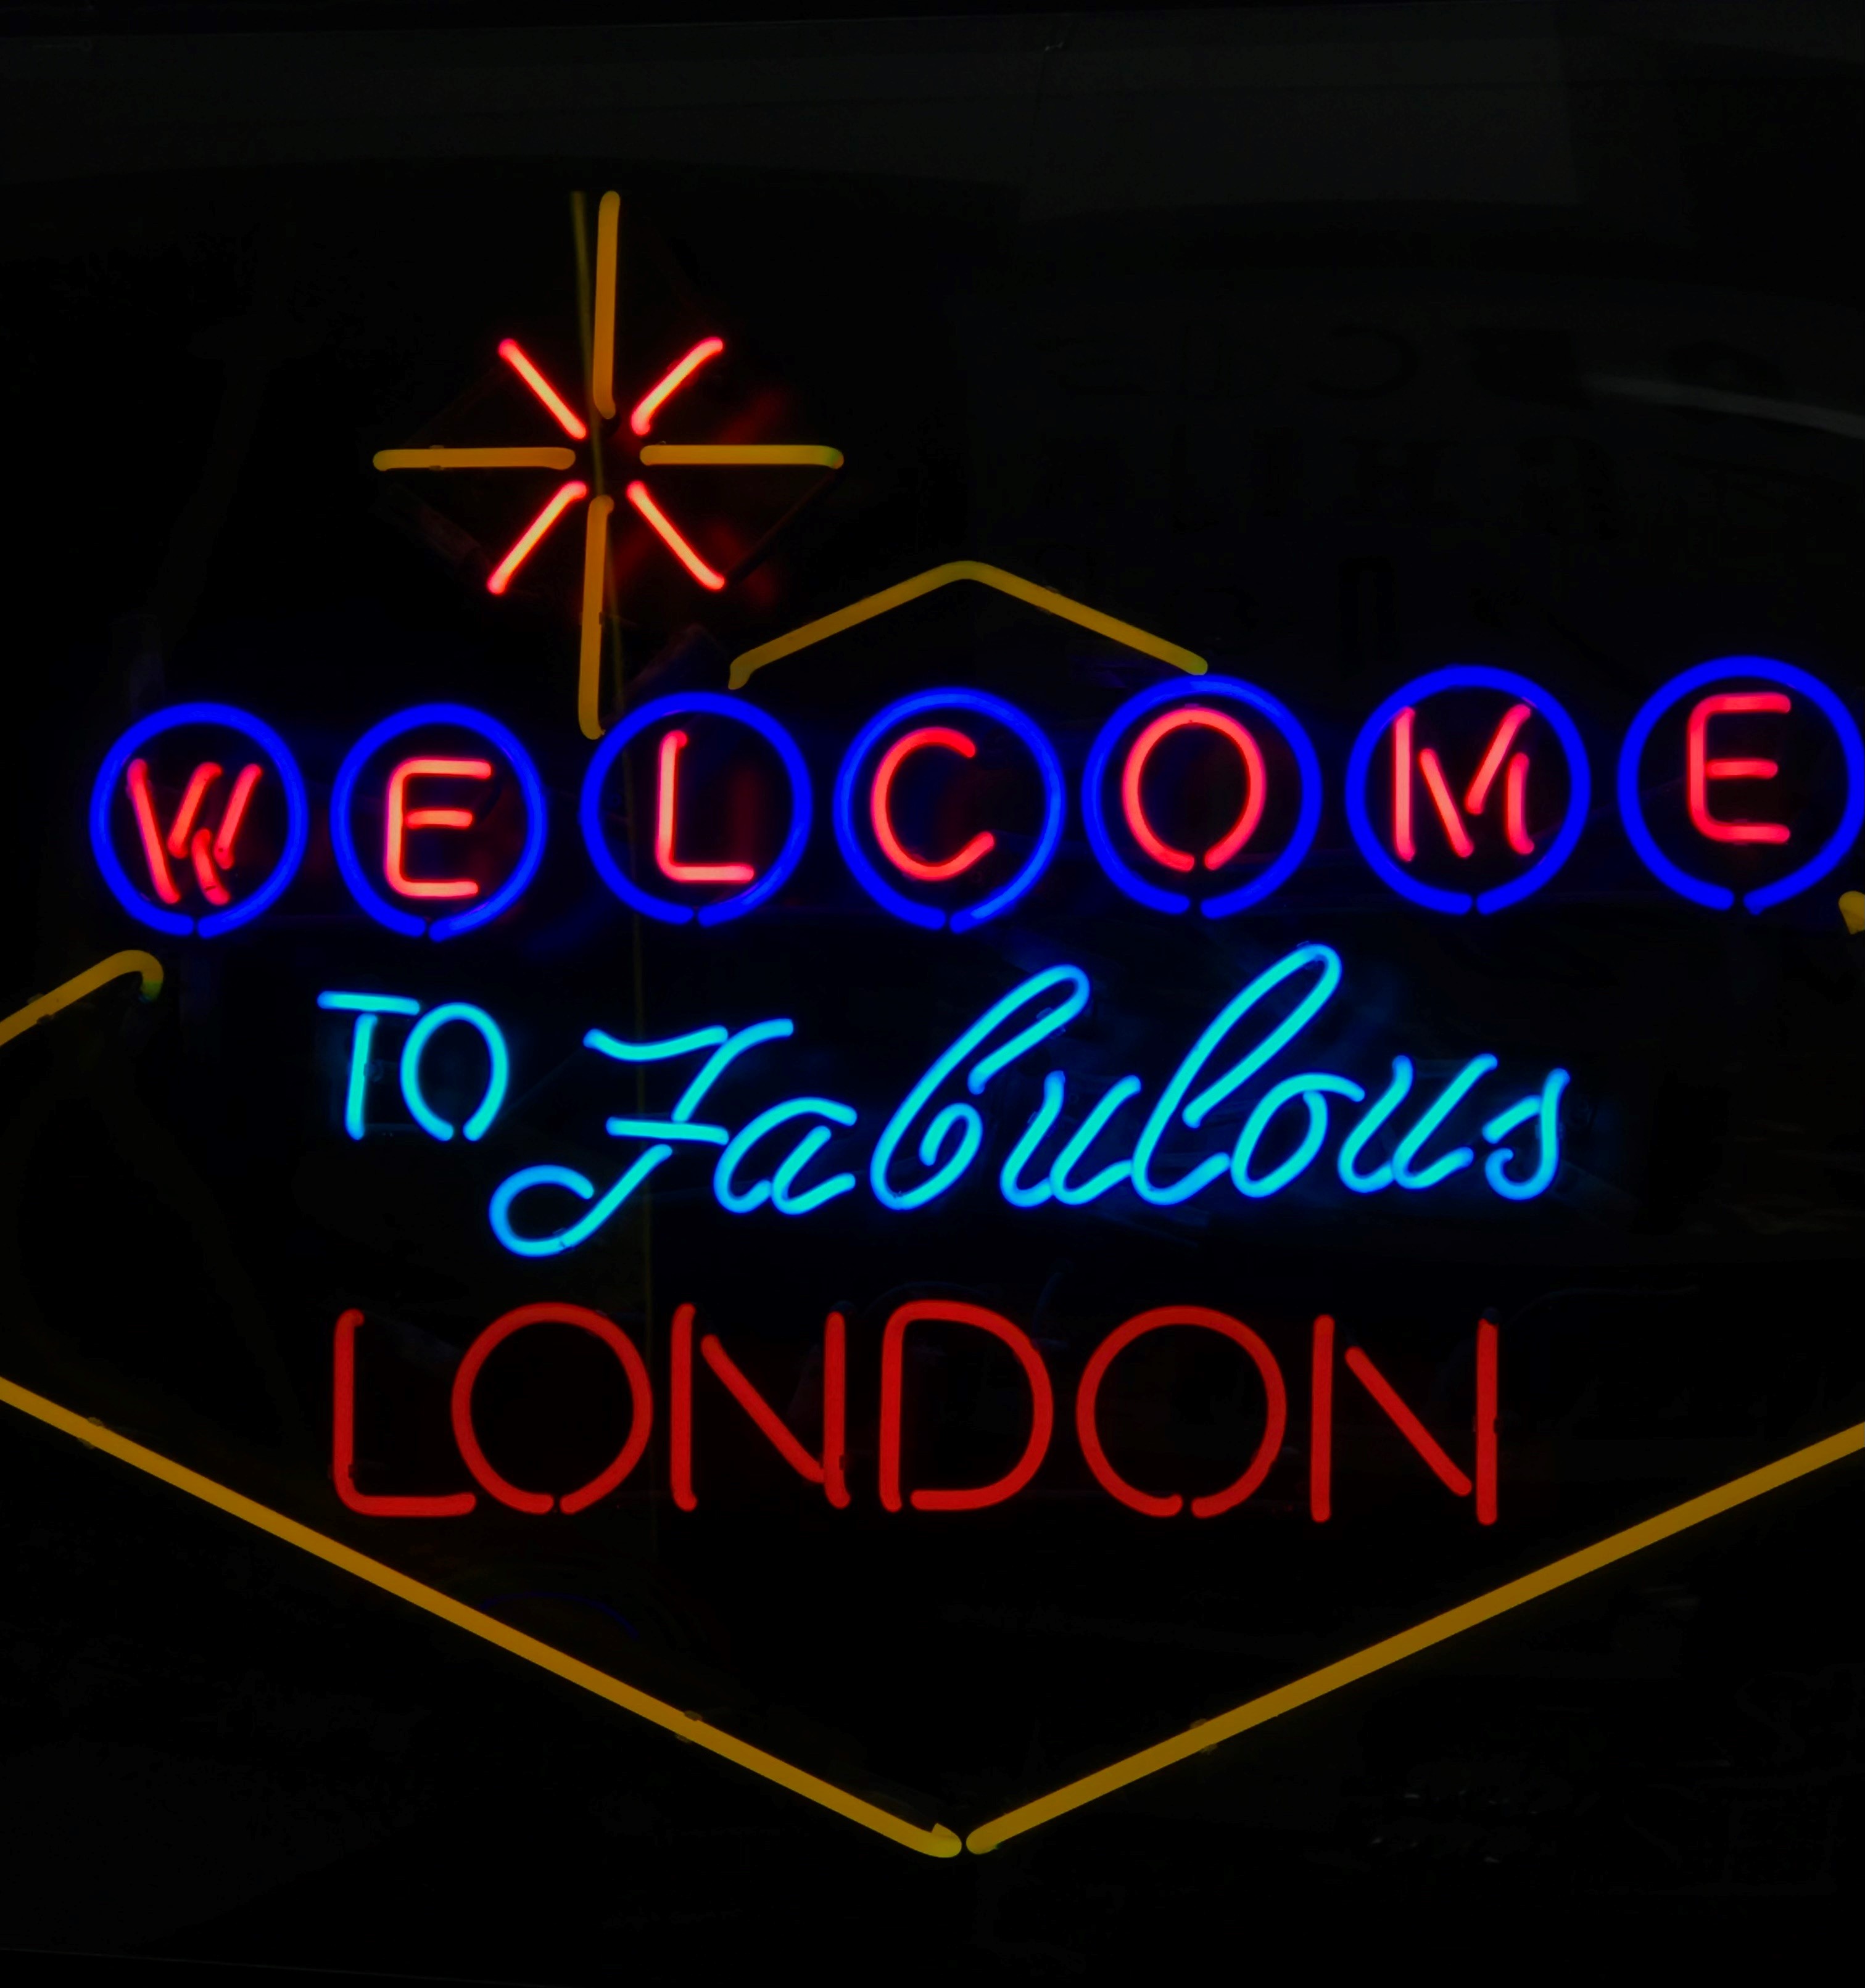 "Welcome to Fabulous London" neon sign writing